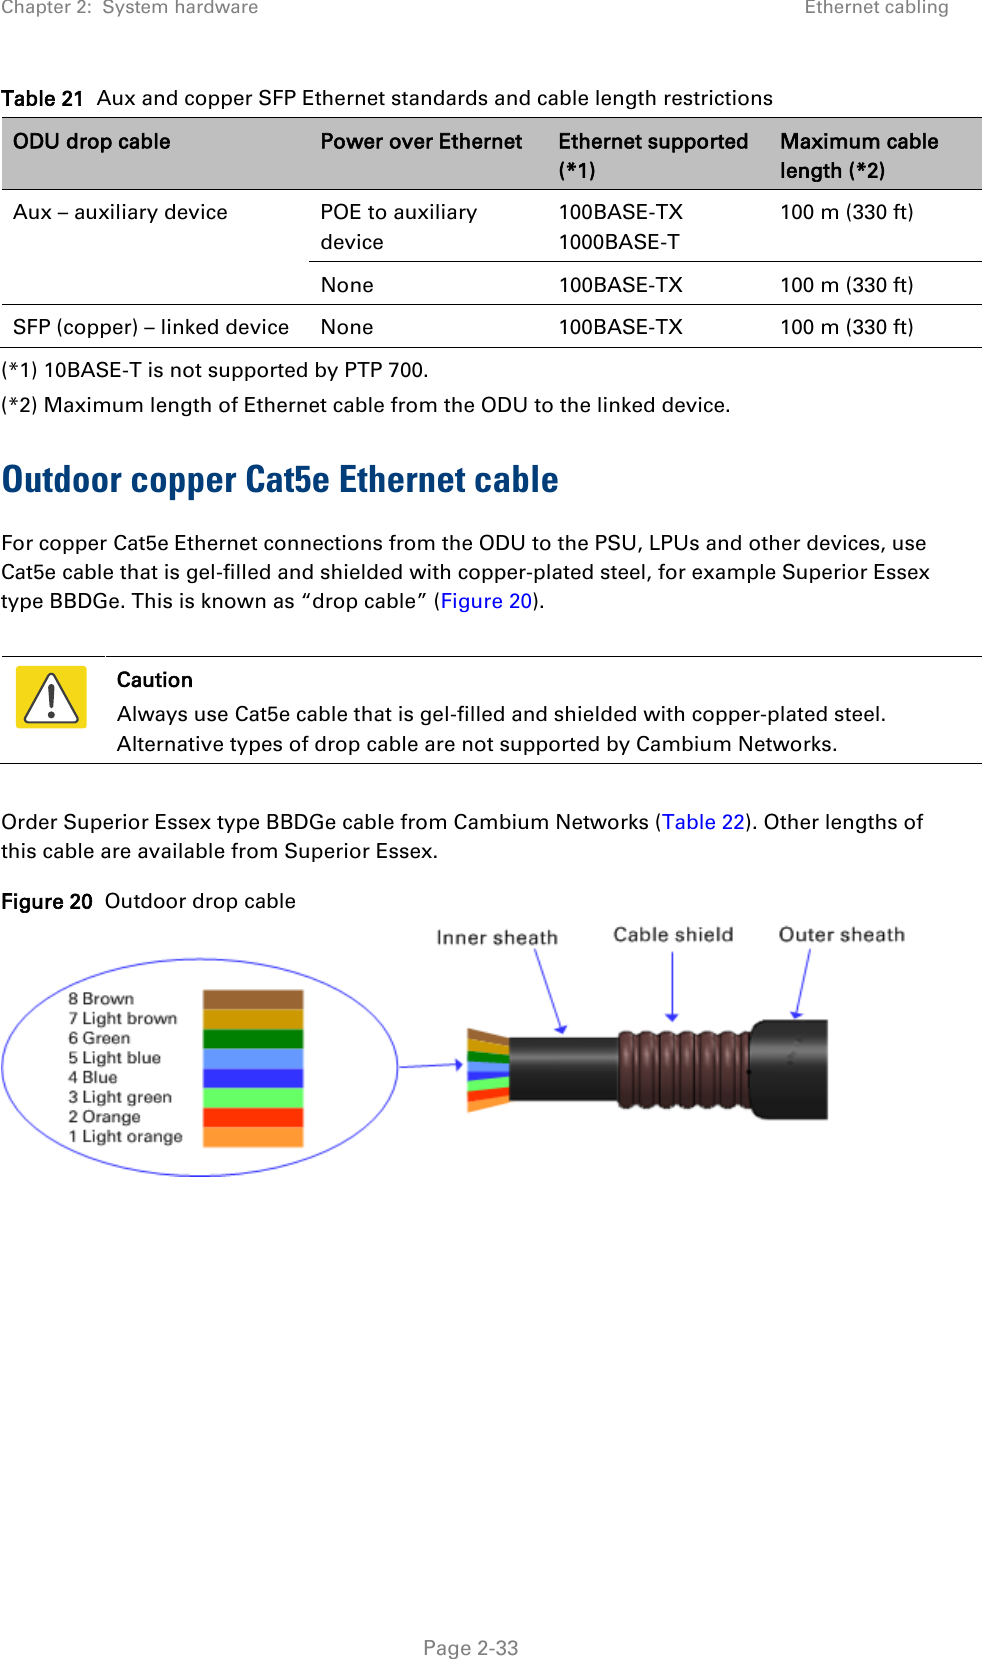 Chapter 2:  System hardware Ethernet cabling  Table 21  Aux and copper SFP Ethernet standards and cable length restrictions ODU drop cable Power over Ethernet Ethernet supported (*1) Maximum cable length (*2) Aux – auxiliary device  POE to auxiliary device 100BASE-TX 1000BASE-T 100 m (330 ft) None 100BASE-TX 100 m (330 ft) SFP (copper) – linked device None 100BASE-TX 100 m (330 ft) (*1) 10BASE-T is not supported by PTP 700.  (*2) Maximum length of Ethernet cable from the ODU to the linked device. Outdoor copper Cat5e Ethernet cable For copper Cat5e Ethernet connections from the ODU to the PSU, LPUs and other devices, use Cat5e cable that is gel-filled and shielded with copper-plated steel, for example Superior Essex  type BBDGe. This is known as “drop cable” (Figure 20).   Caution Always use Cat5e cable that is gel-filled and shielded with copper-plated steel. Alternative types of drop cable are not supported by Cambium Networks.  Order Superior Essex type BBDGe cable from Cambium Networks (Table 22). Other lengths of this cable are available from Superior Essex. Figure 20  Outdoor drop cable      Page 2-33 